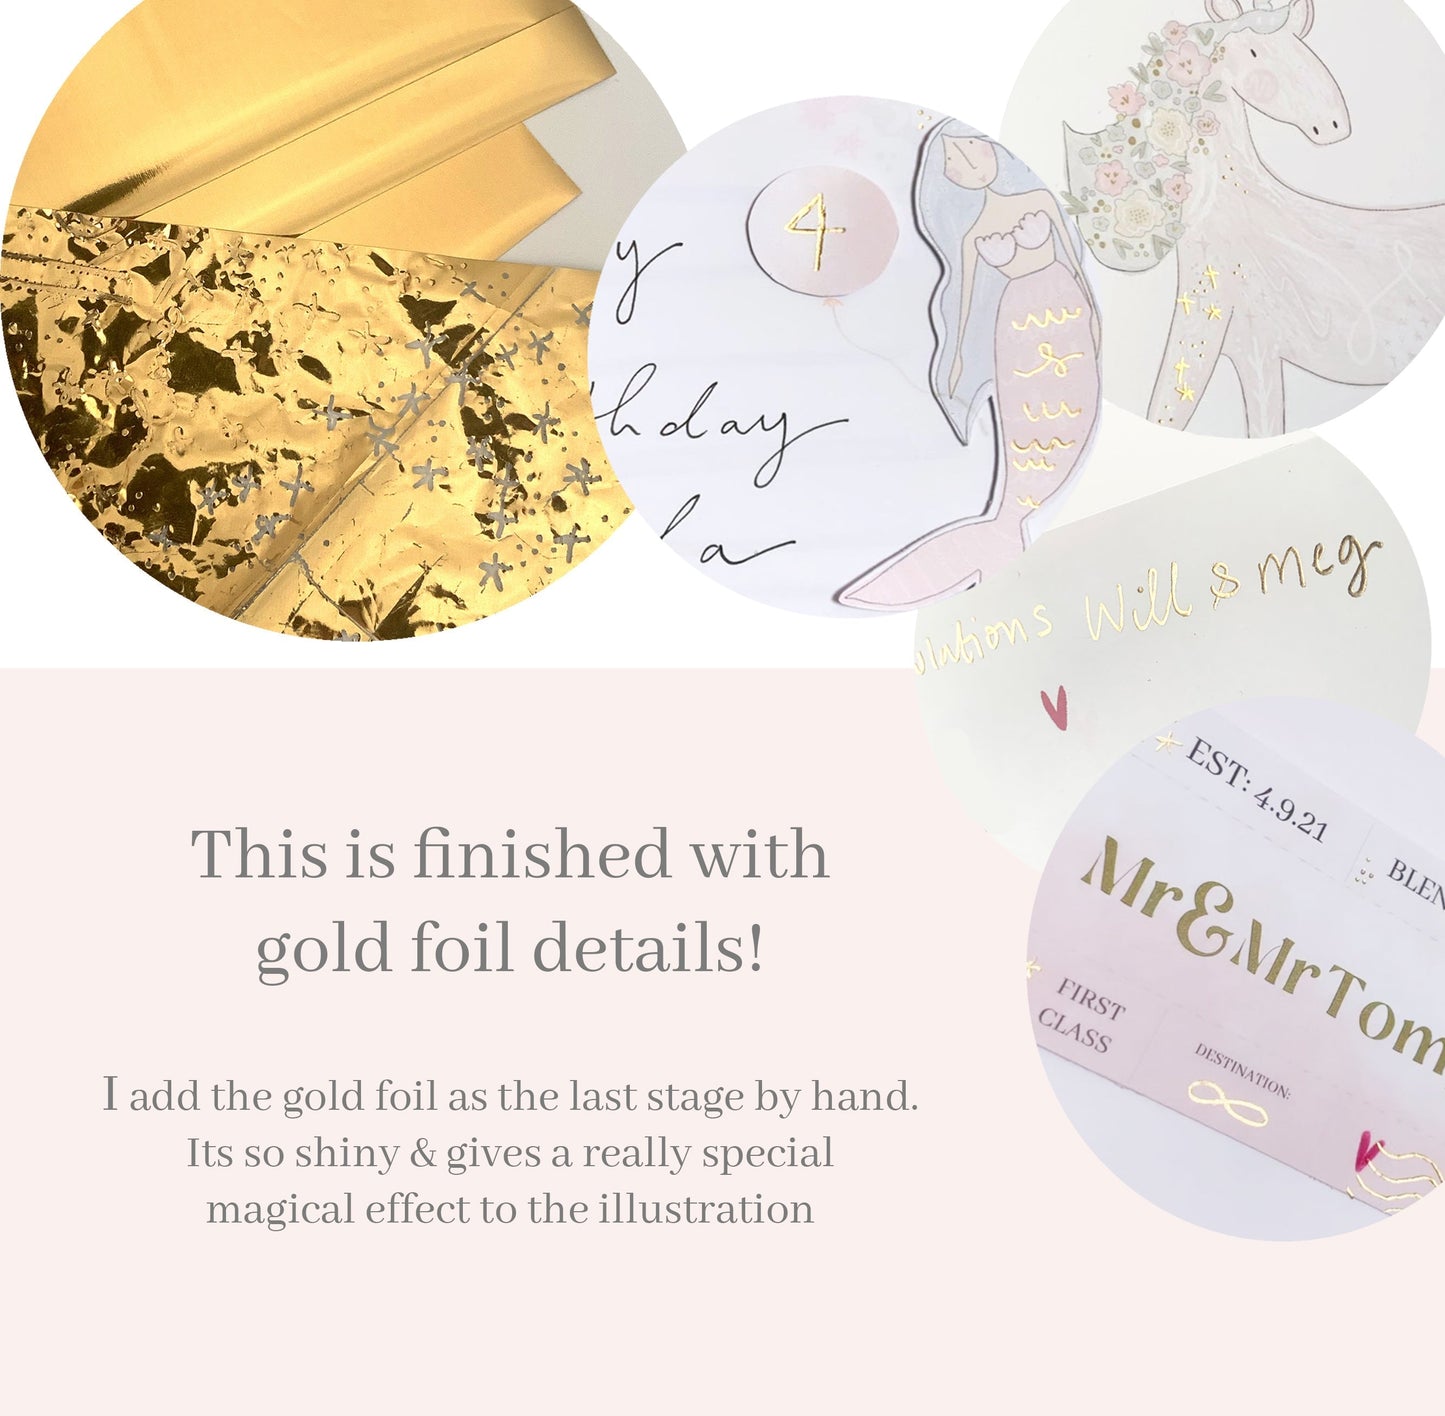 Unbelievable Dragon pastel personalised print - gold foil knight Myth & legend